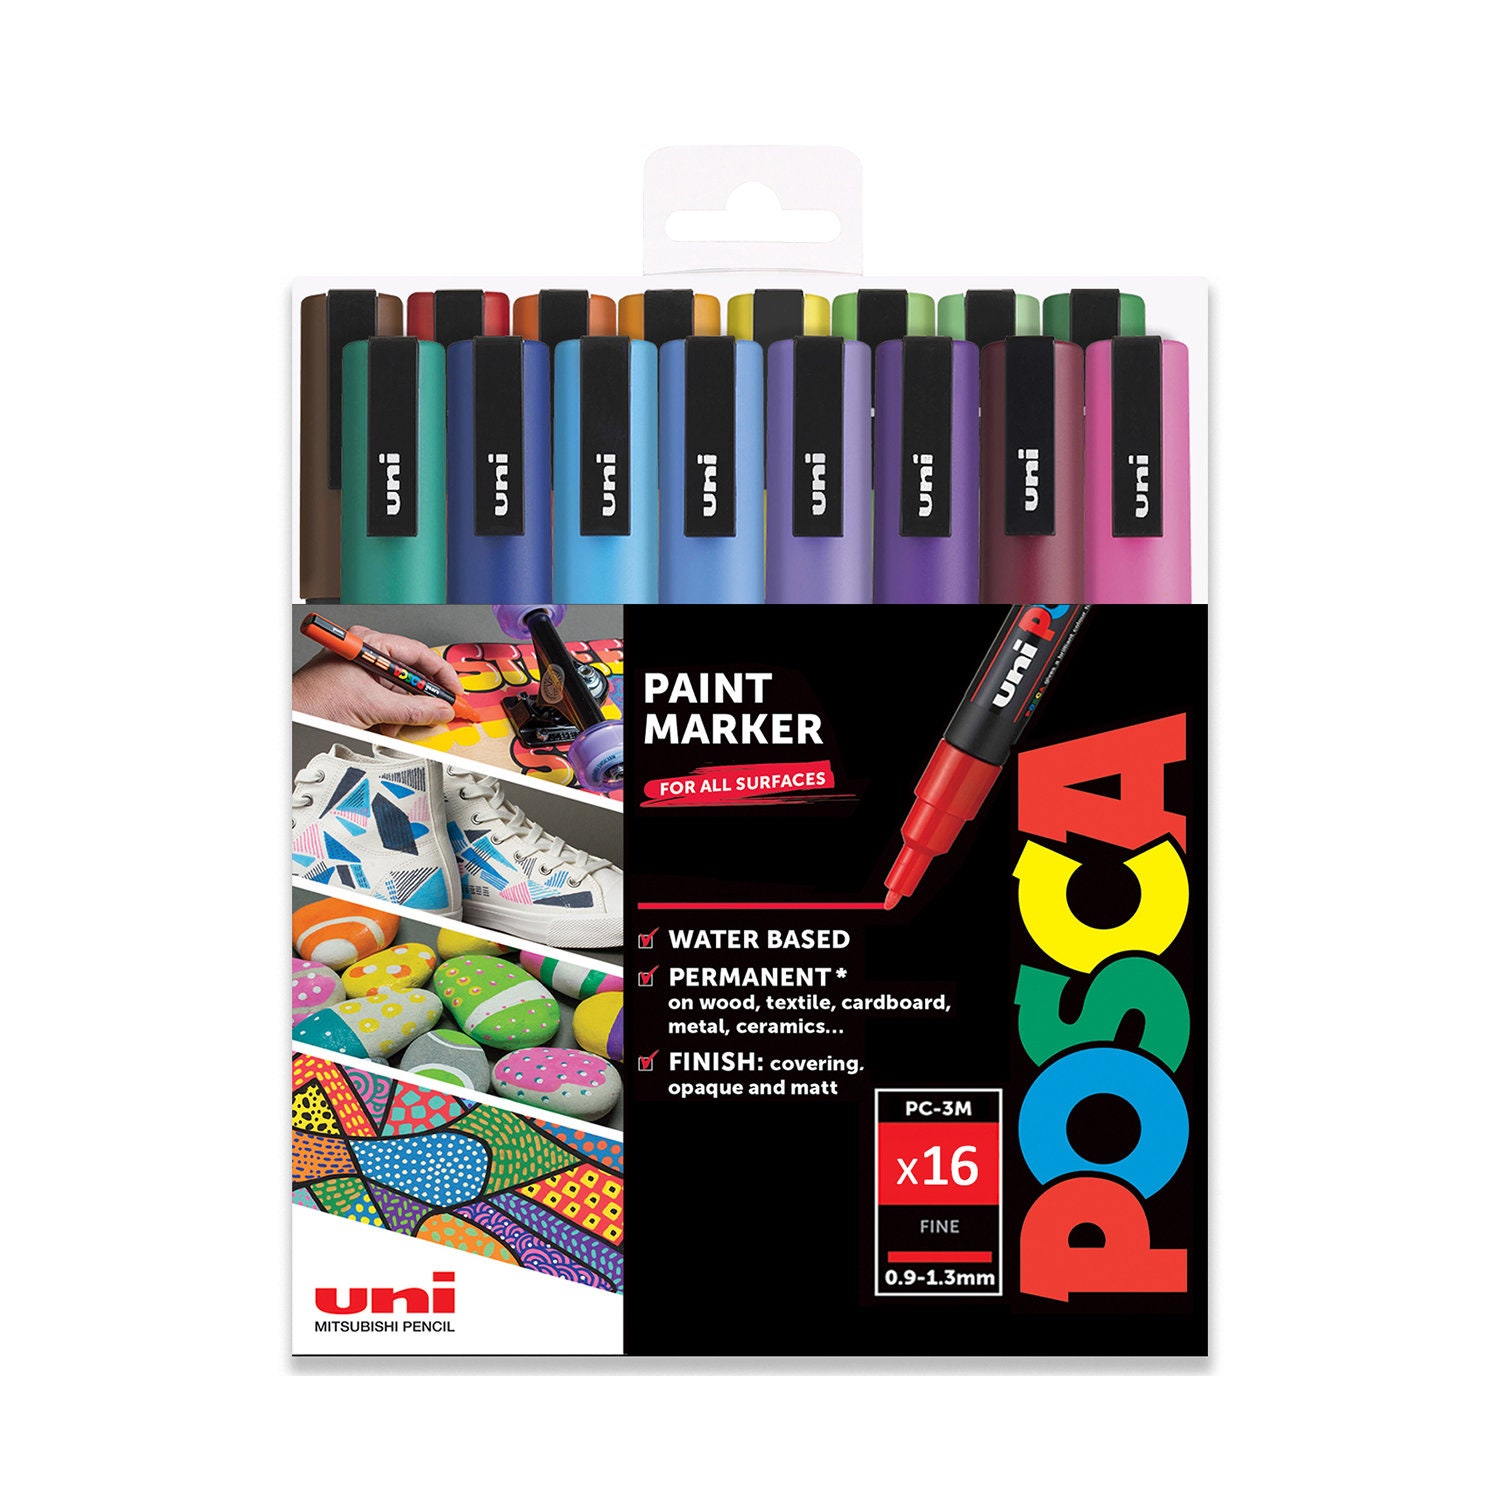 POSCA Fine PC-3M Art Paint Marker Pens Gift Set of 16 Full Spectrum Drawing  Drafting Poster Markers Glass, Fabric, Metal & Paper 